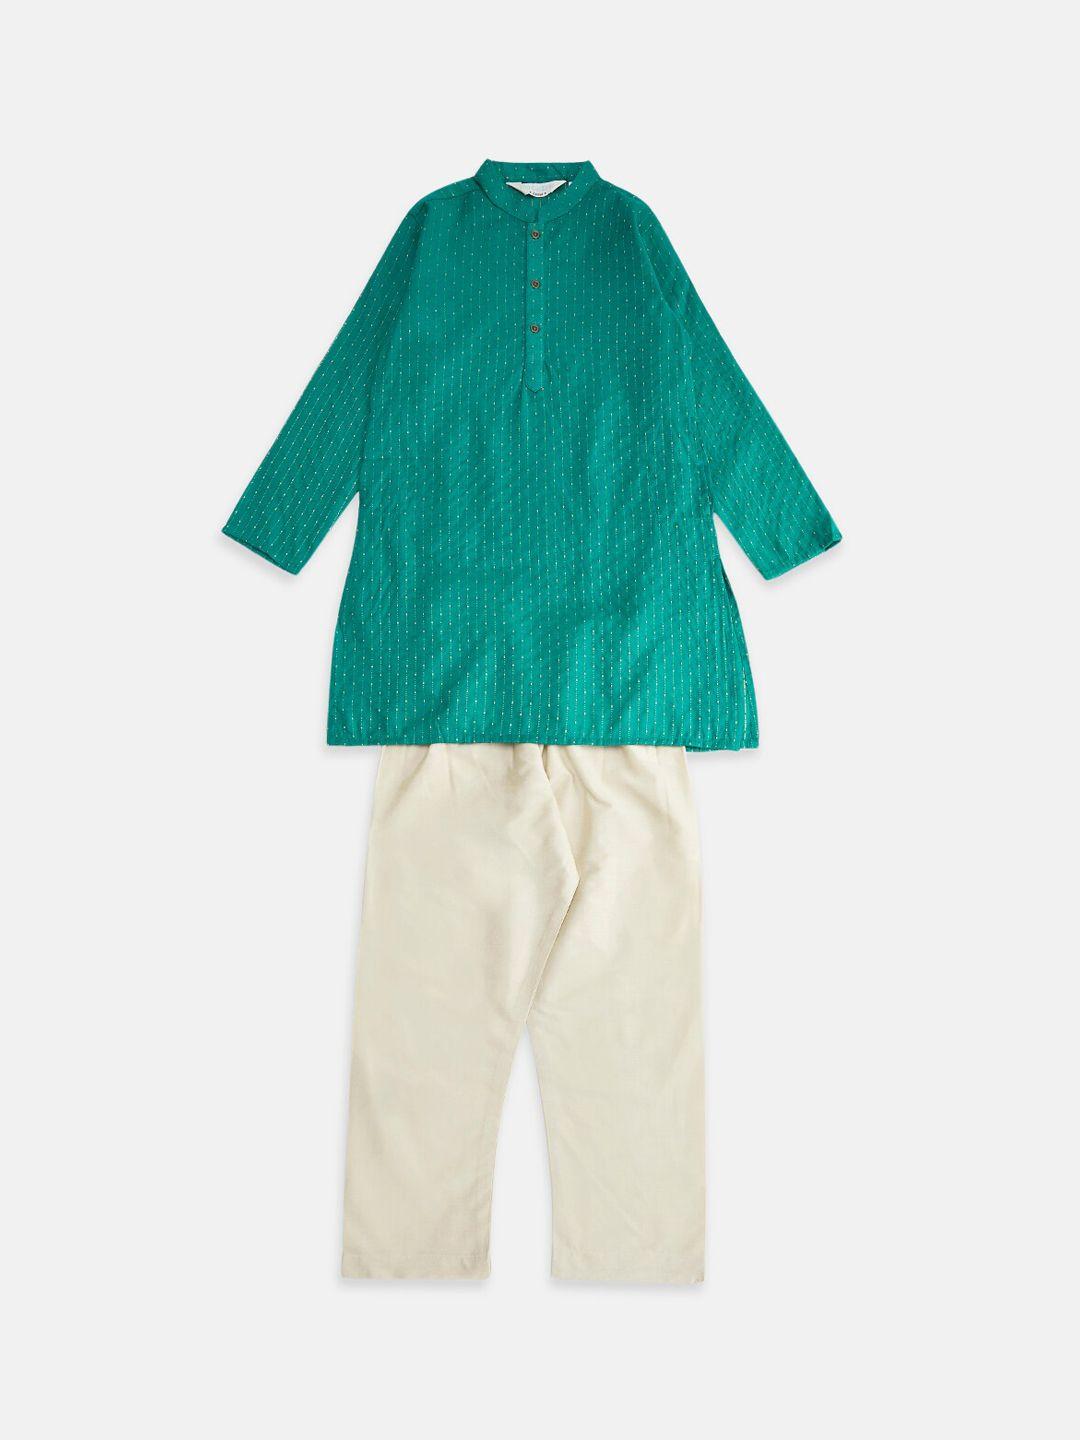 indus-route-by-pantaloons-boys-teal-green-&-white-striped-kurta-with-pyjama